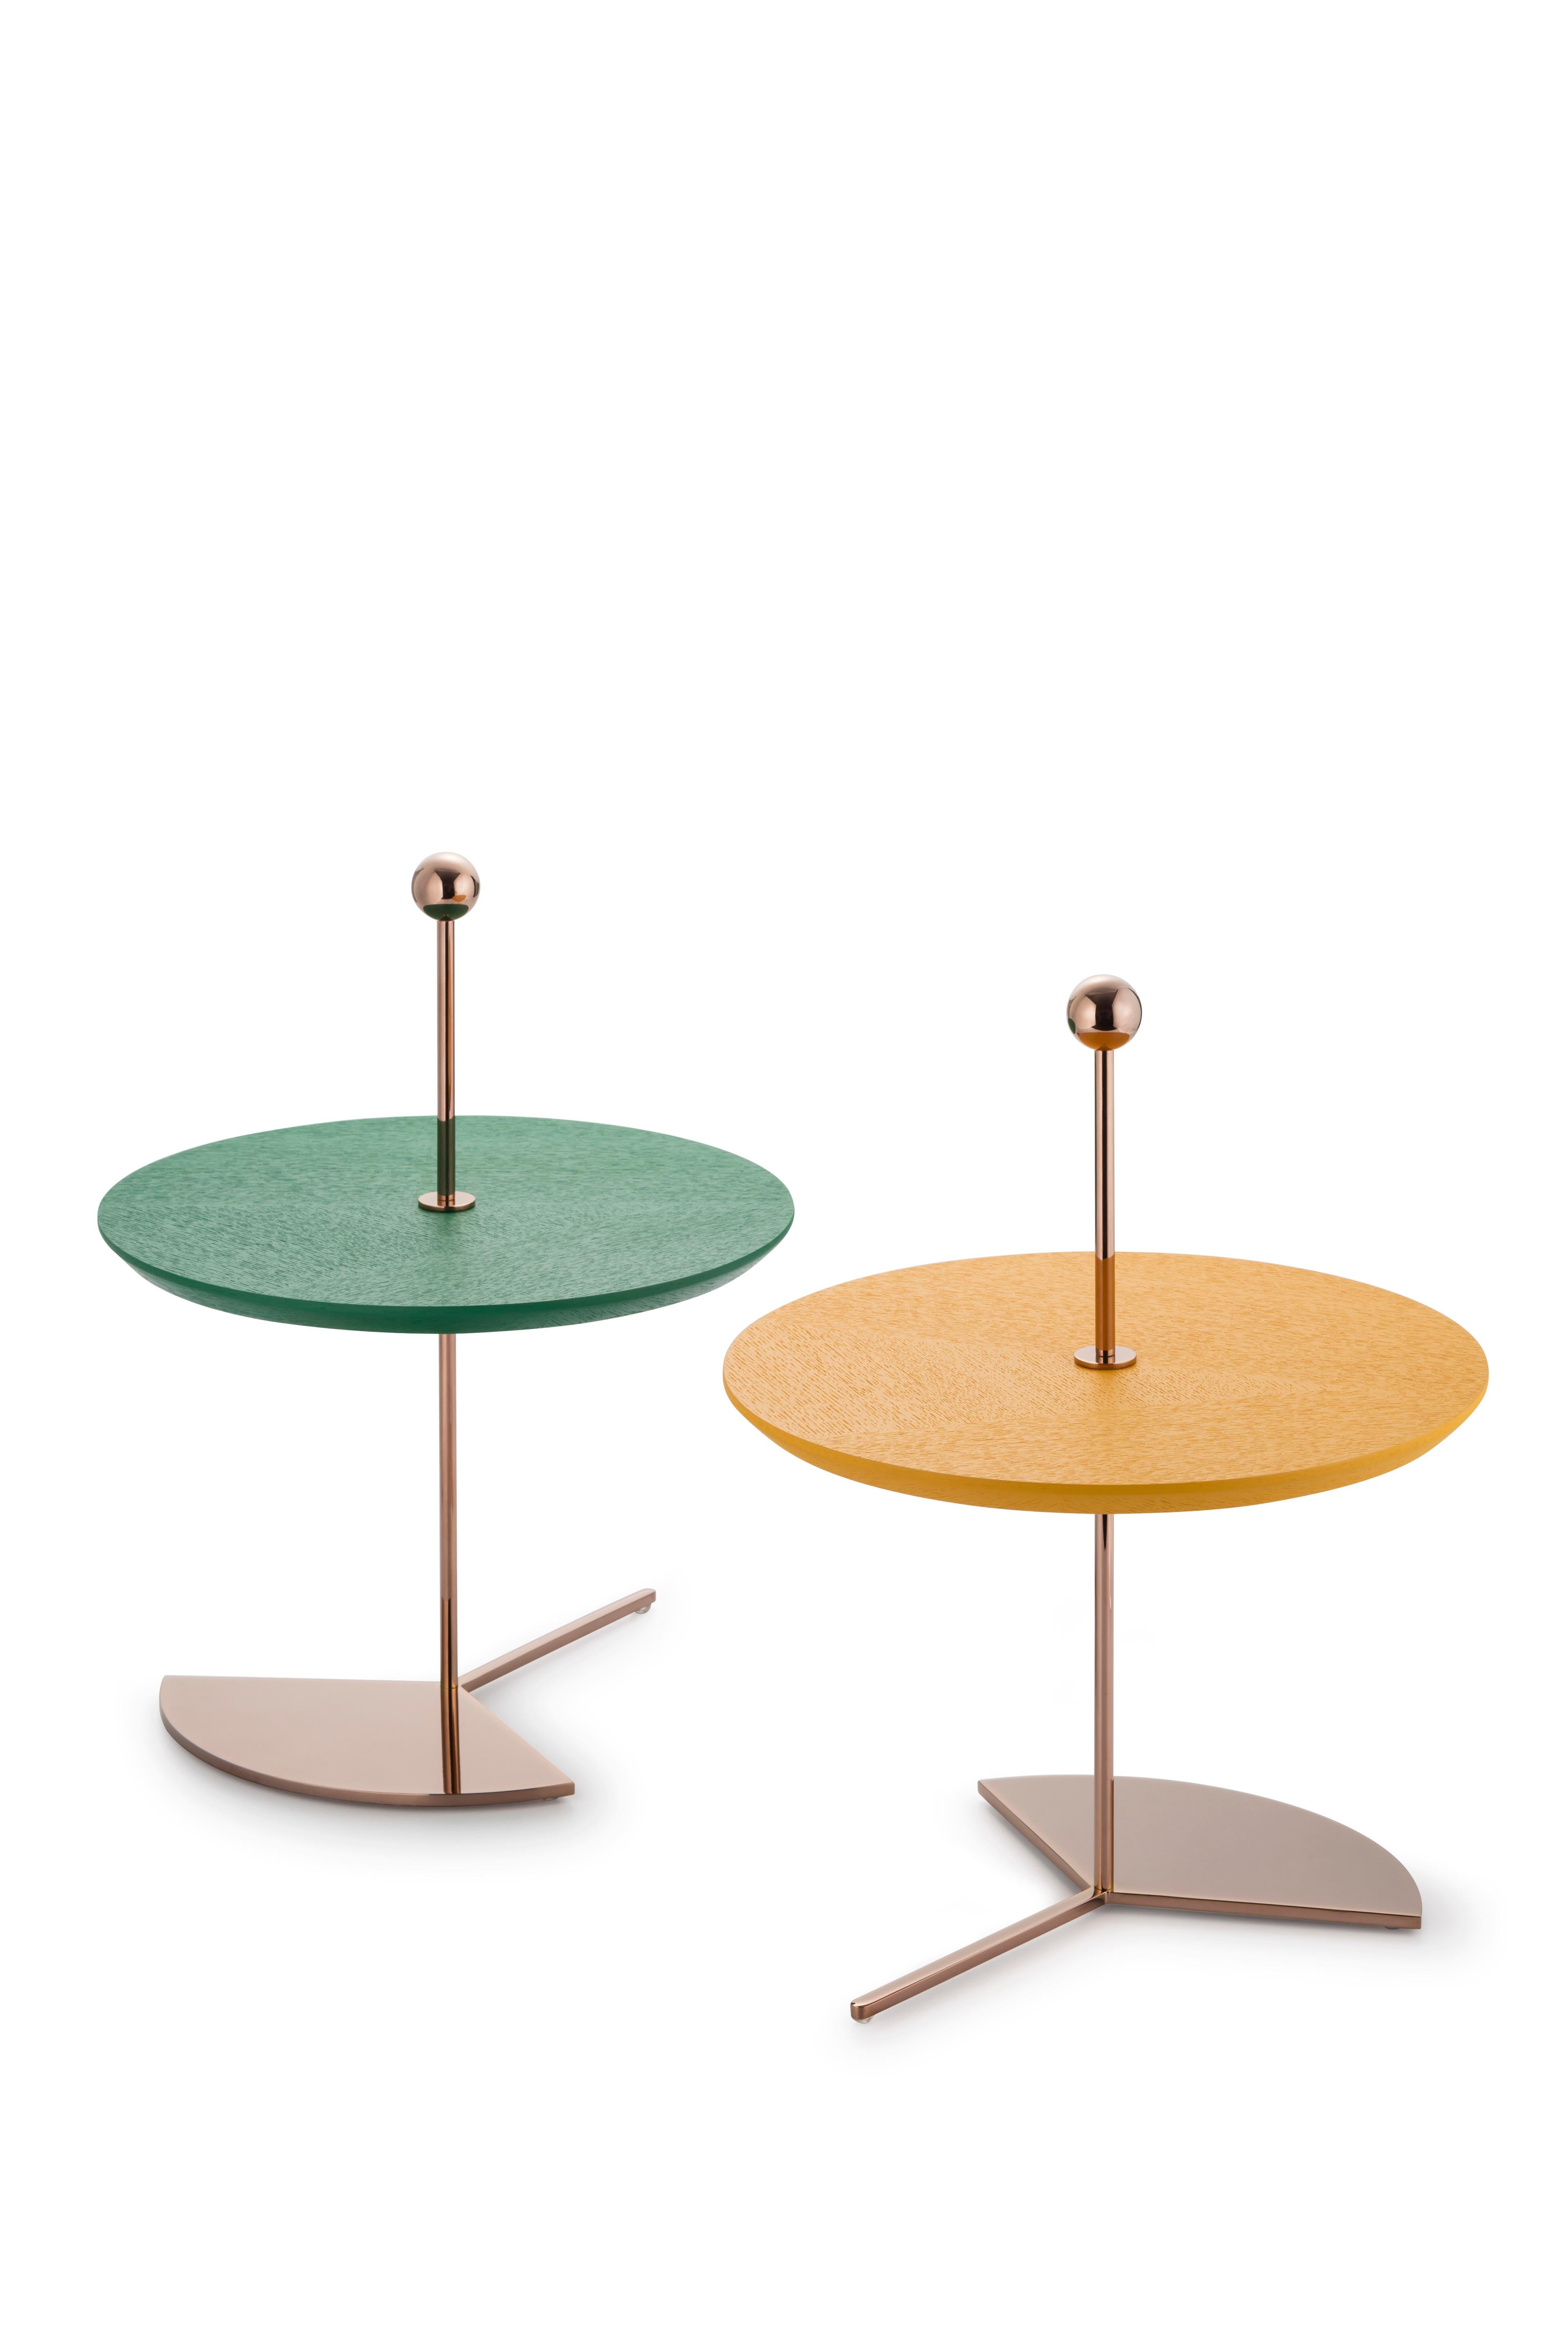 Contemporary cake stand
Measures: Diameter 30, height 38 cm
Tray in natural color ash veneer
Base and handle in plated metal-coated with glossy Pink Copper finish
Available in 3 colors (Wood, Green or Yellow)
From Earth, one can only see the